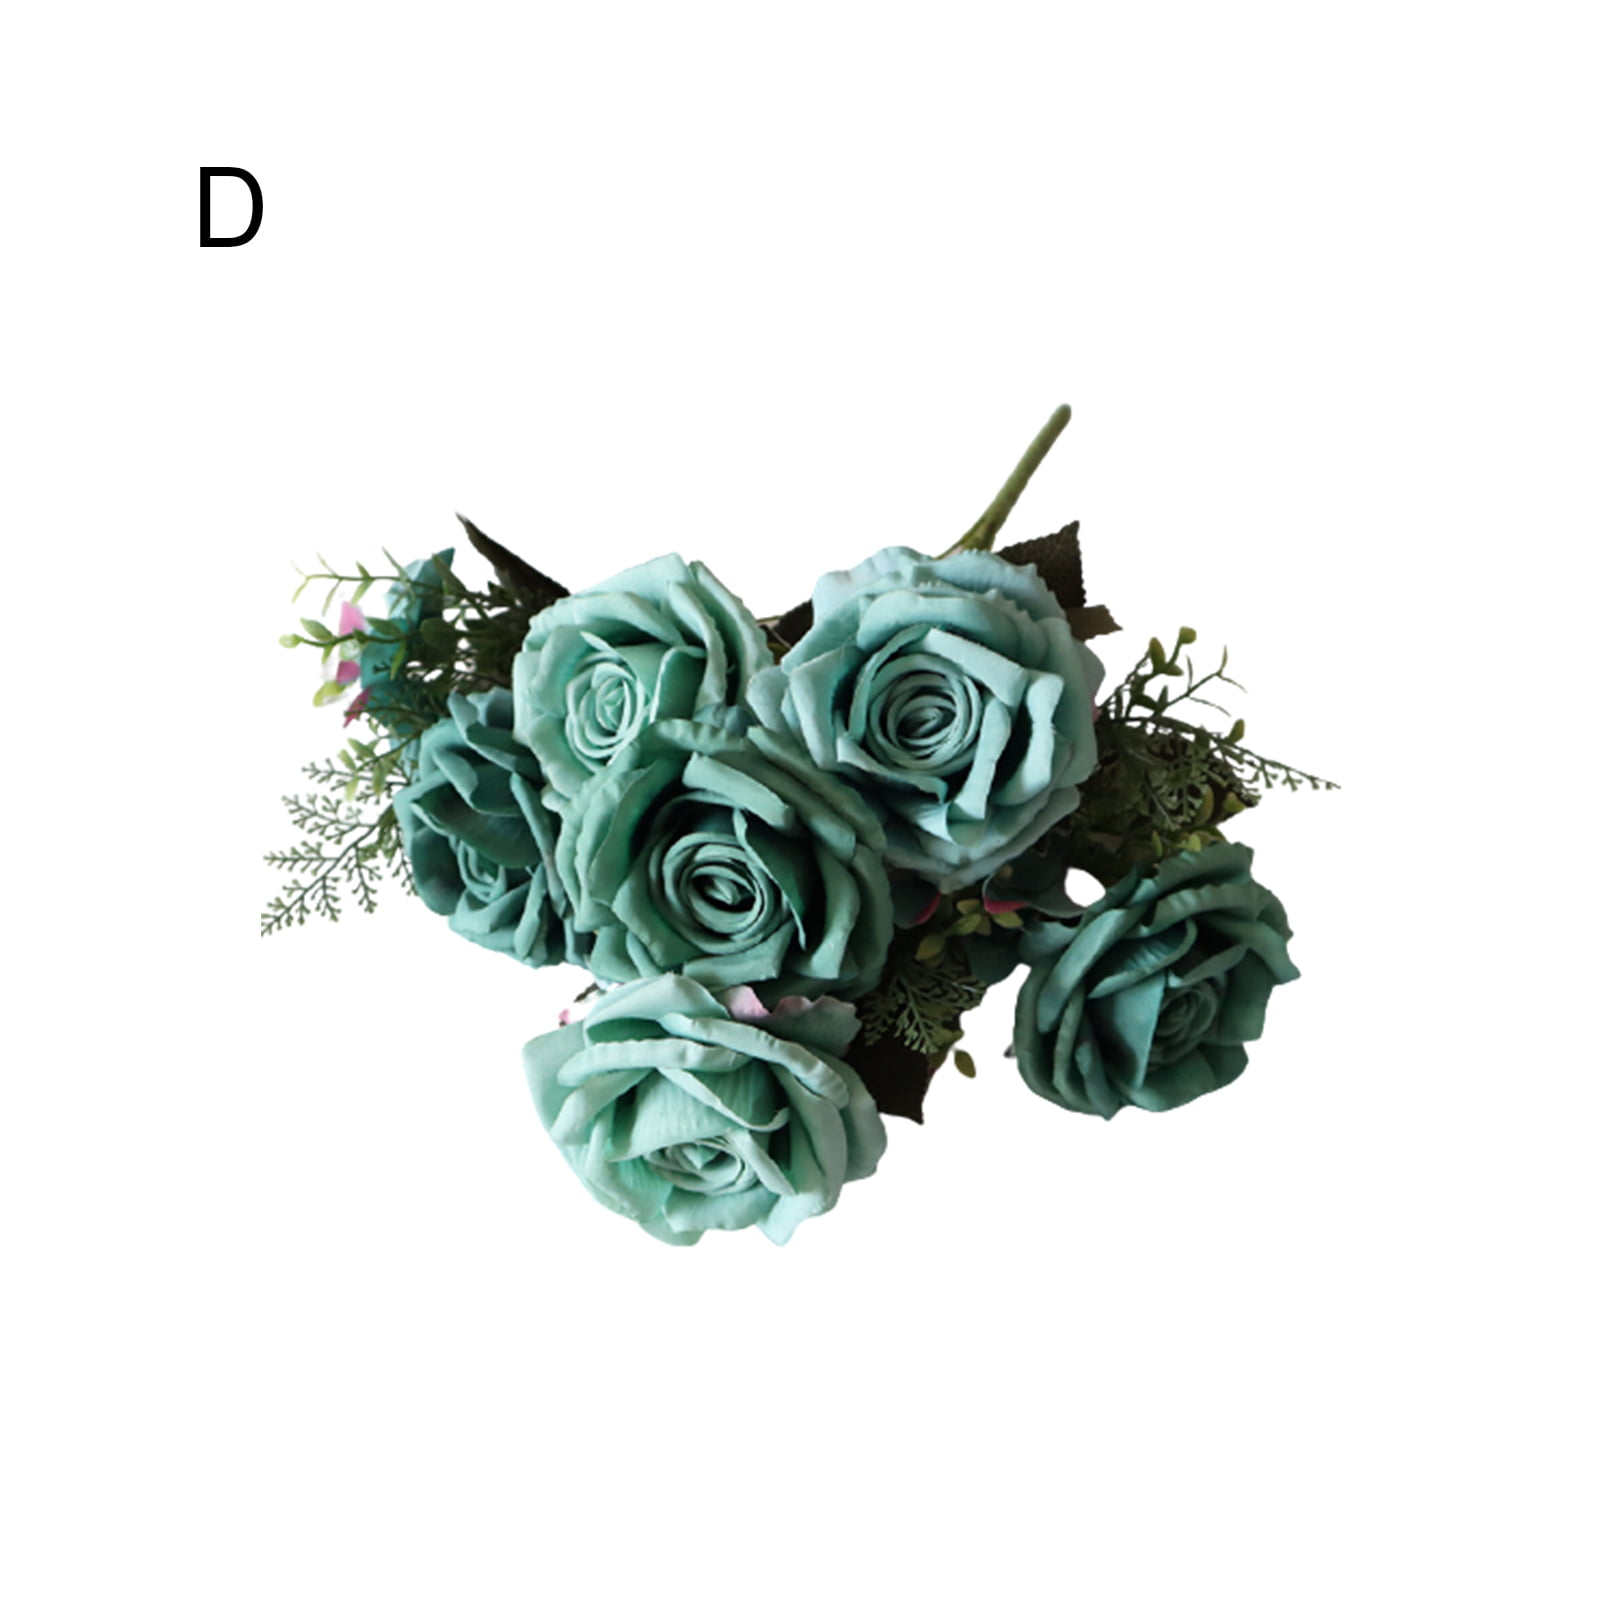 Details about   1Pc Artificial Flower Black Rose Silk Fake Floral Home Wedding Party Decor Gift 